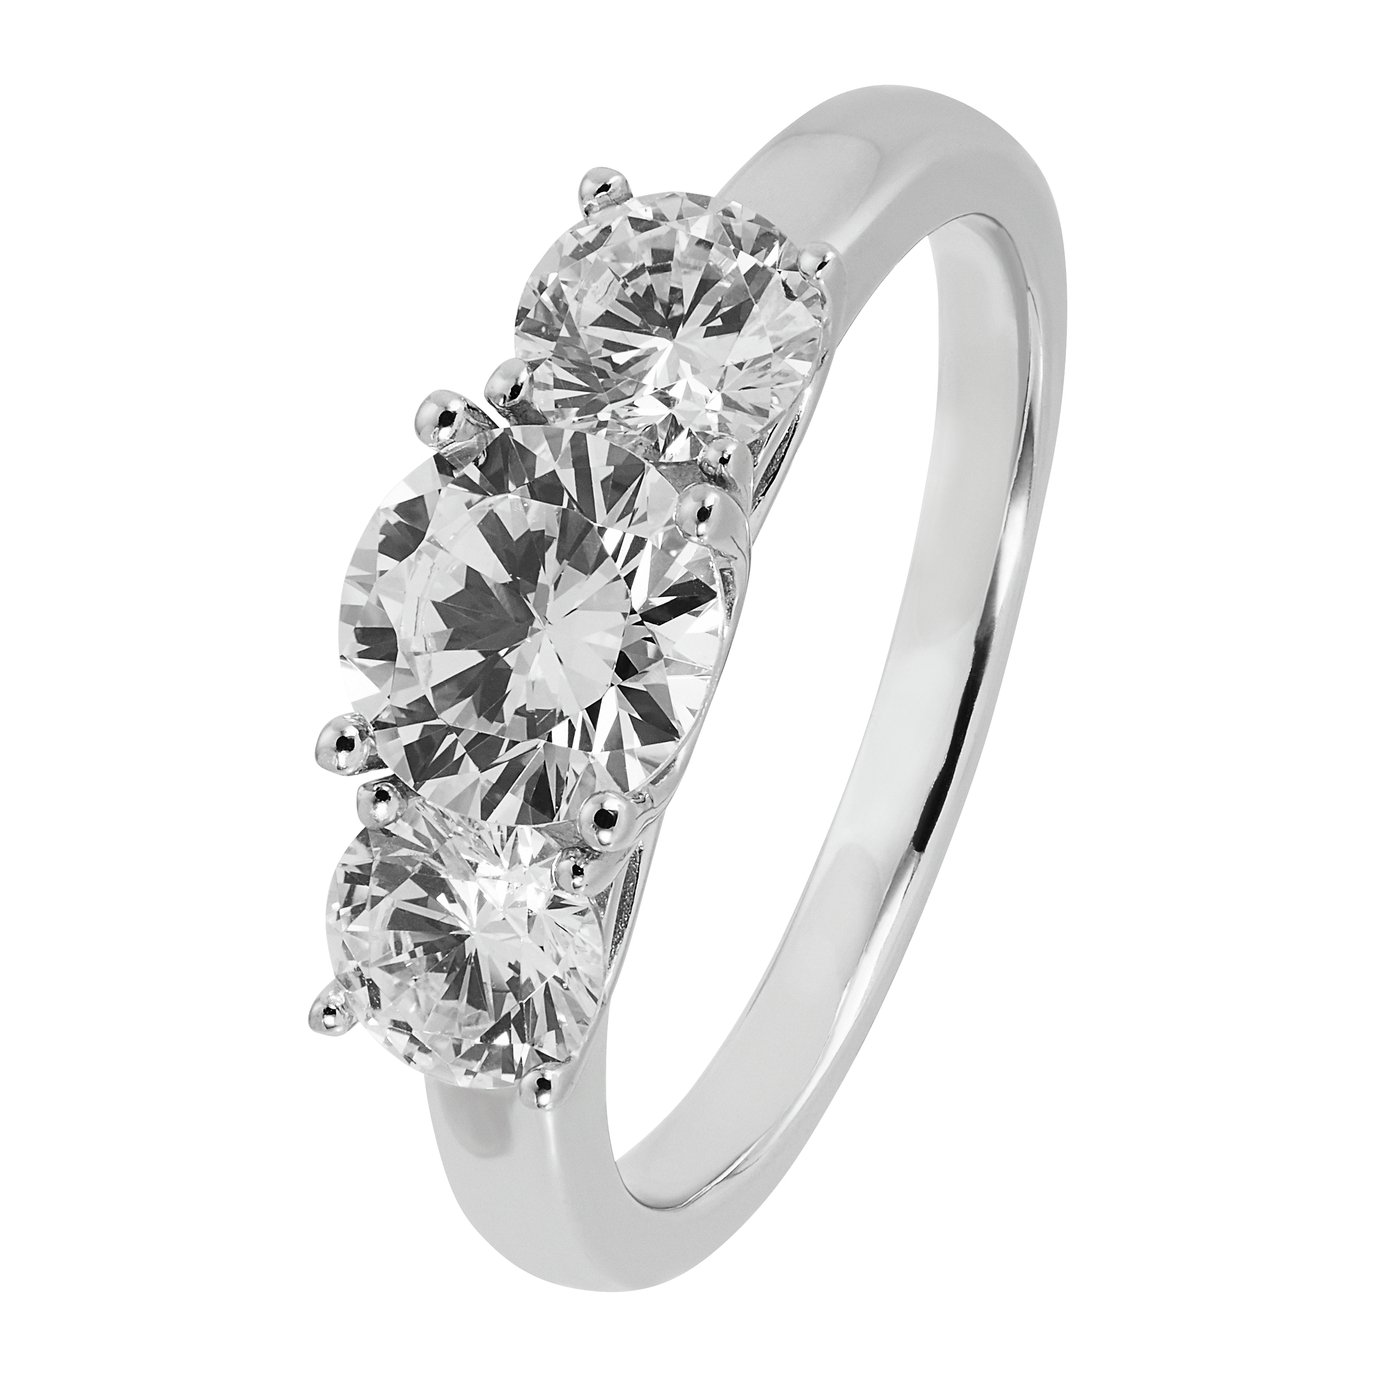 Revere Sterling Silver Round Cubic Zirconia Wedding Ring - I